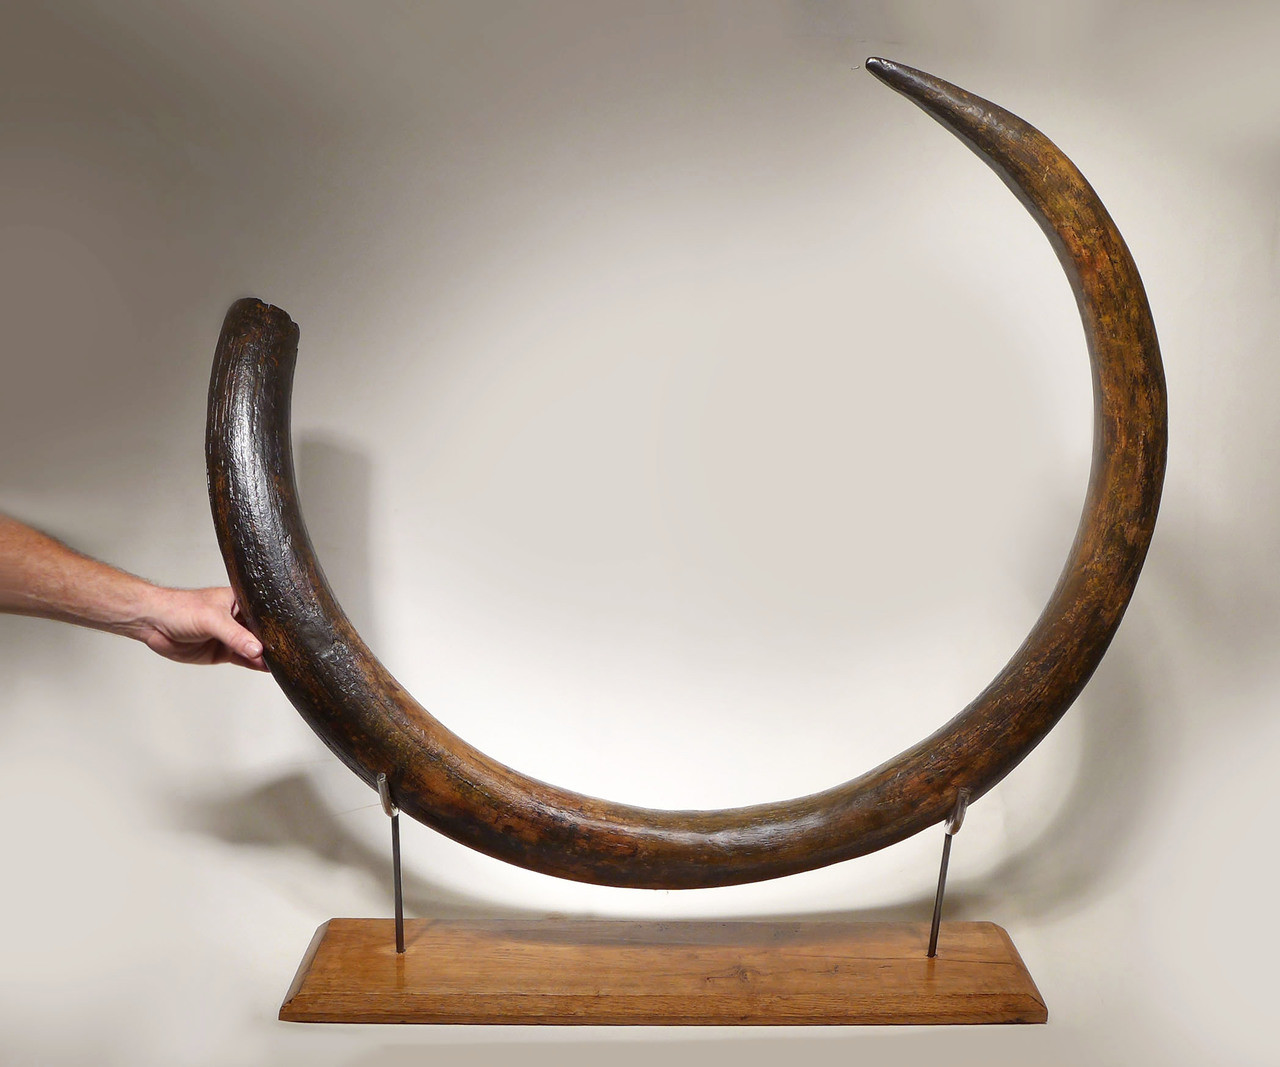 MT029 - OUR FINEST EVER CIRCULAR WOOLLY MAMMOTH TUSK FROM EUROPE EXCEEDING 7 FEET IN LENGTH